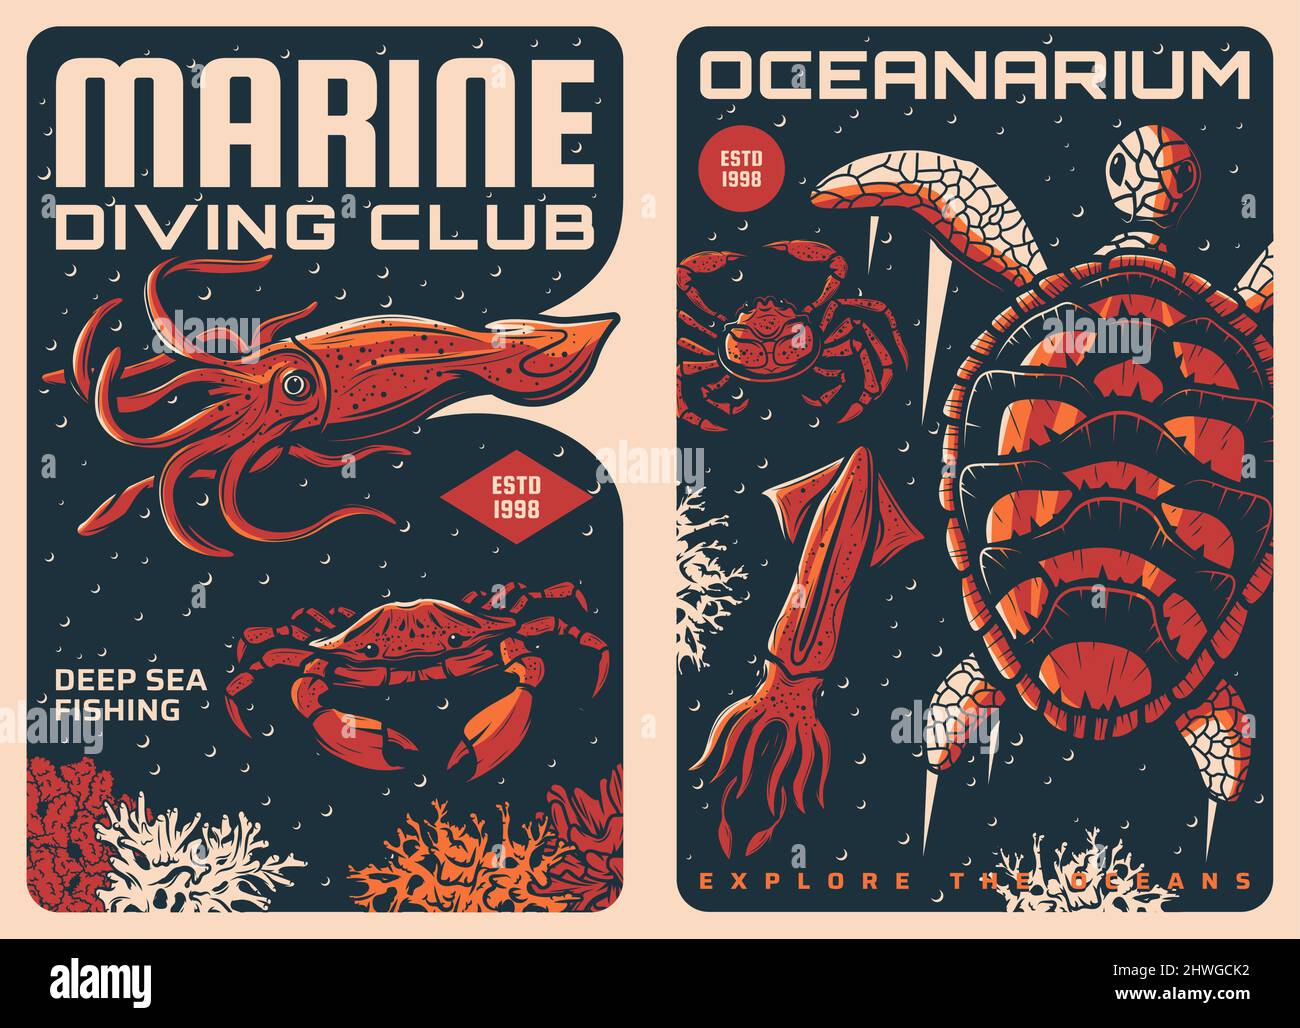 Squid, crab and turtle retro posters. Marine diving hobby, deep